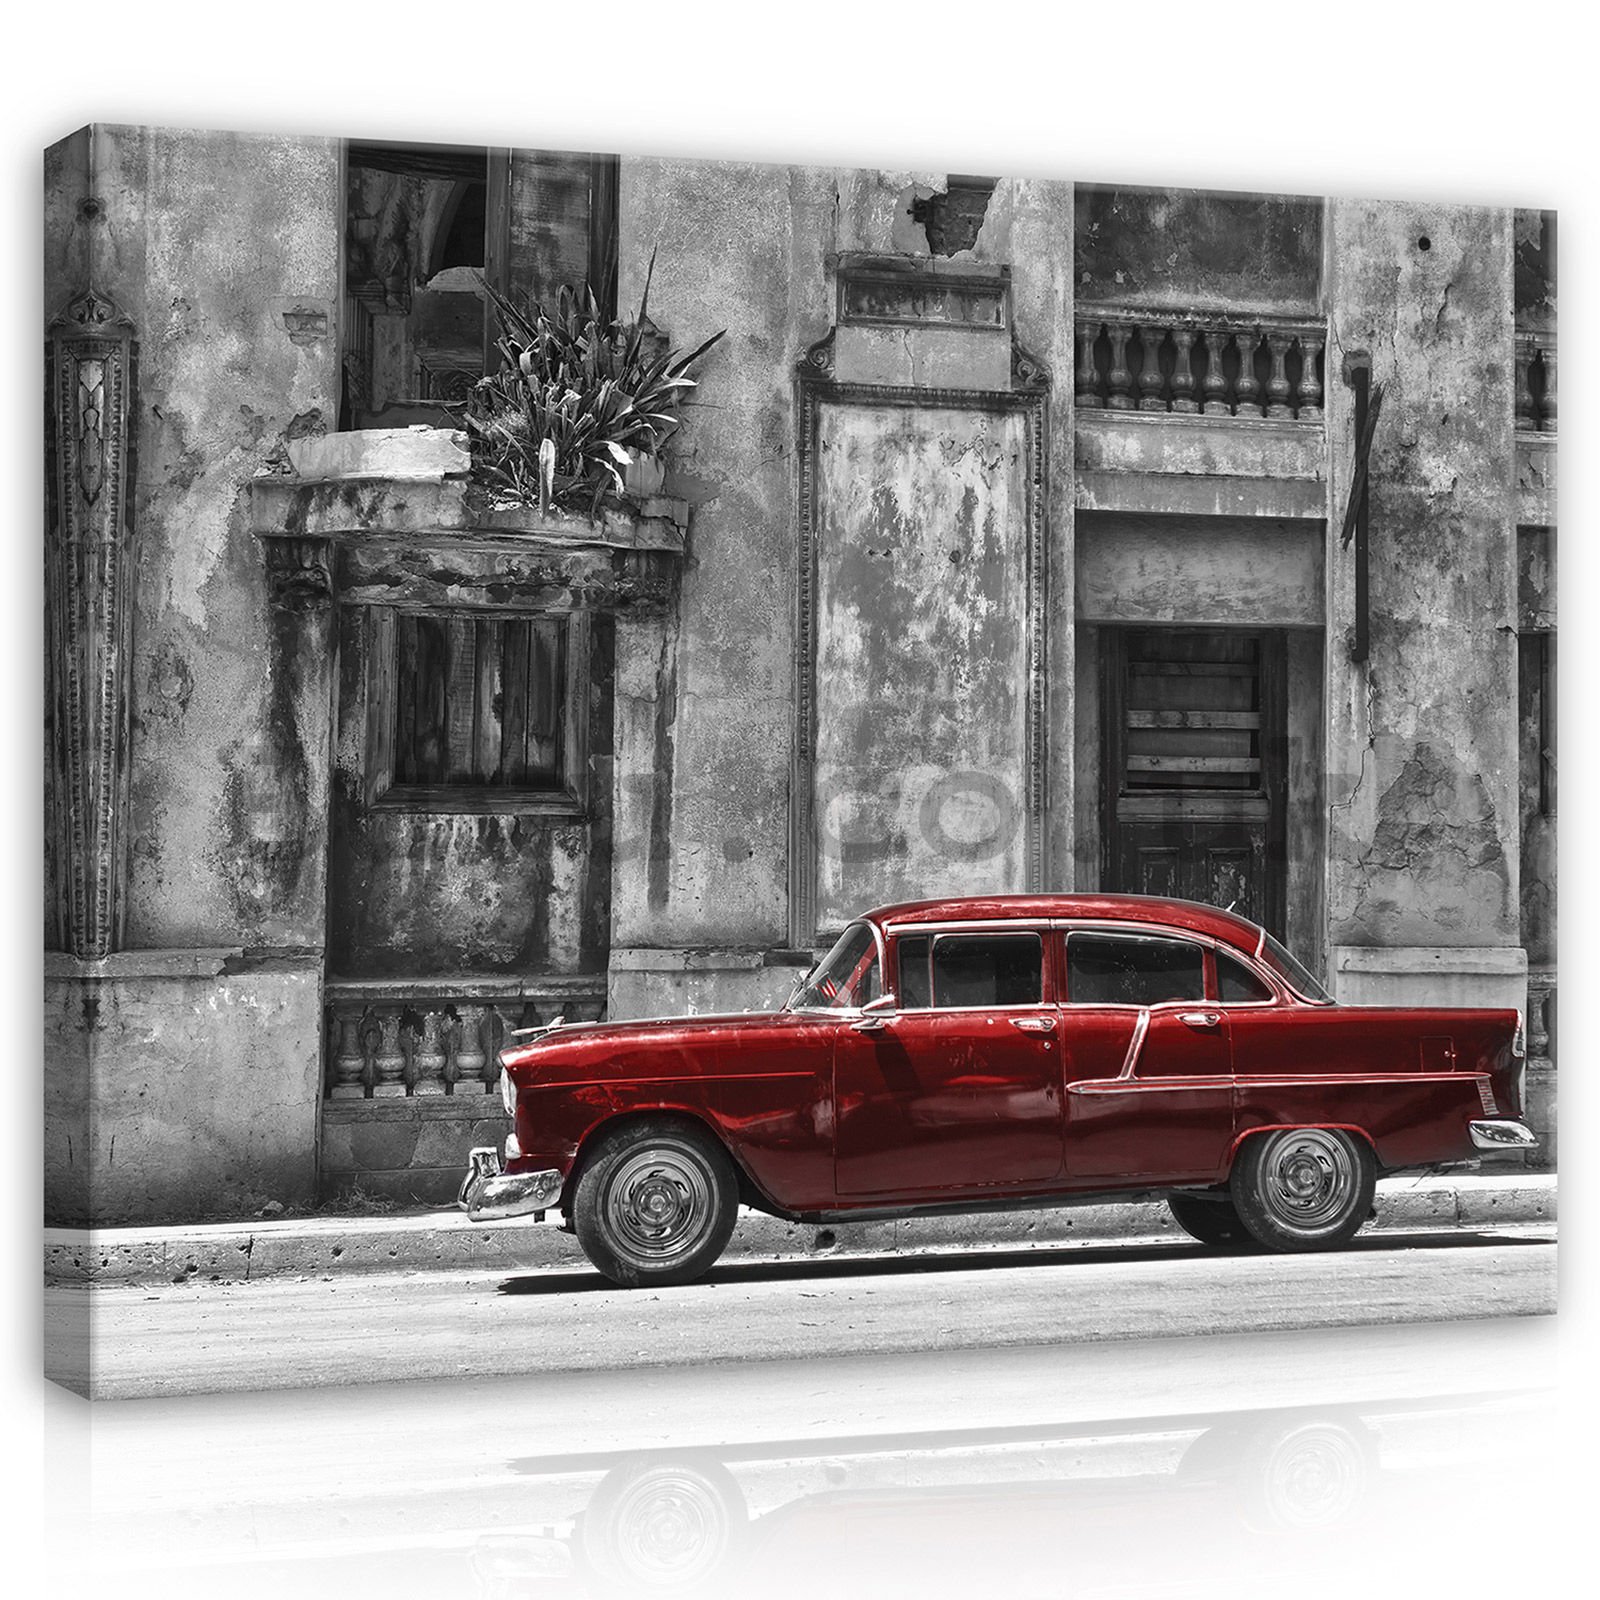 Painting on canvas: Cuban street red car - 100x75 cm